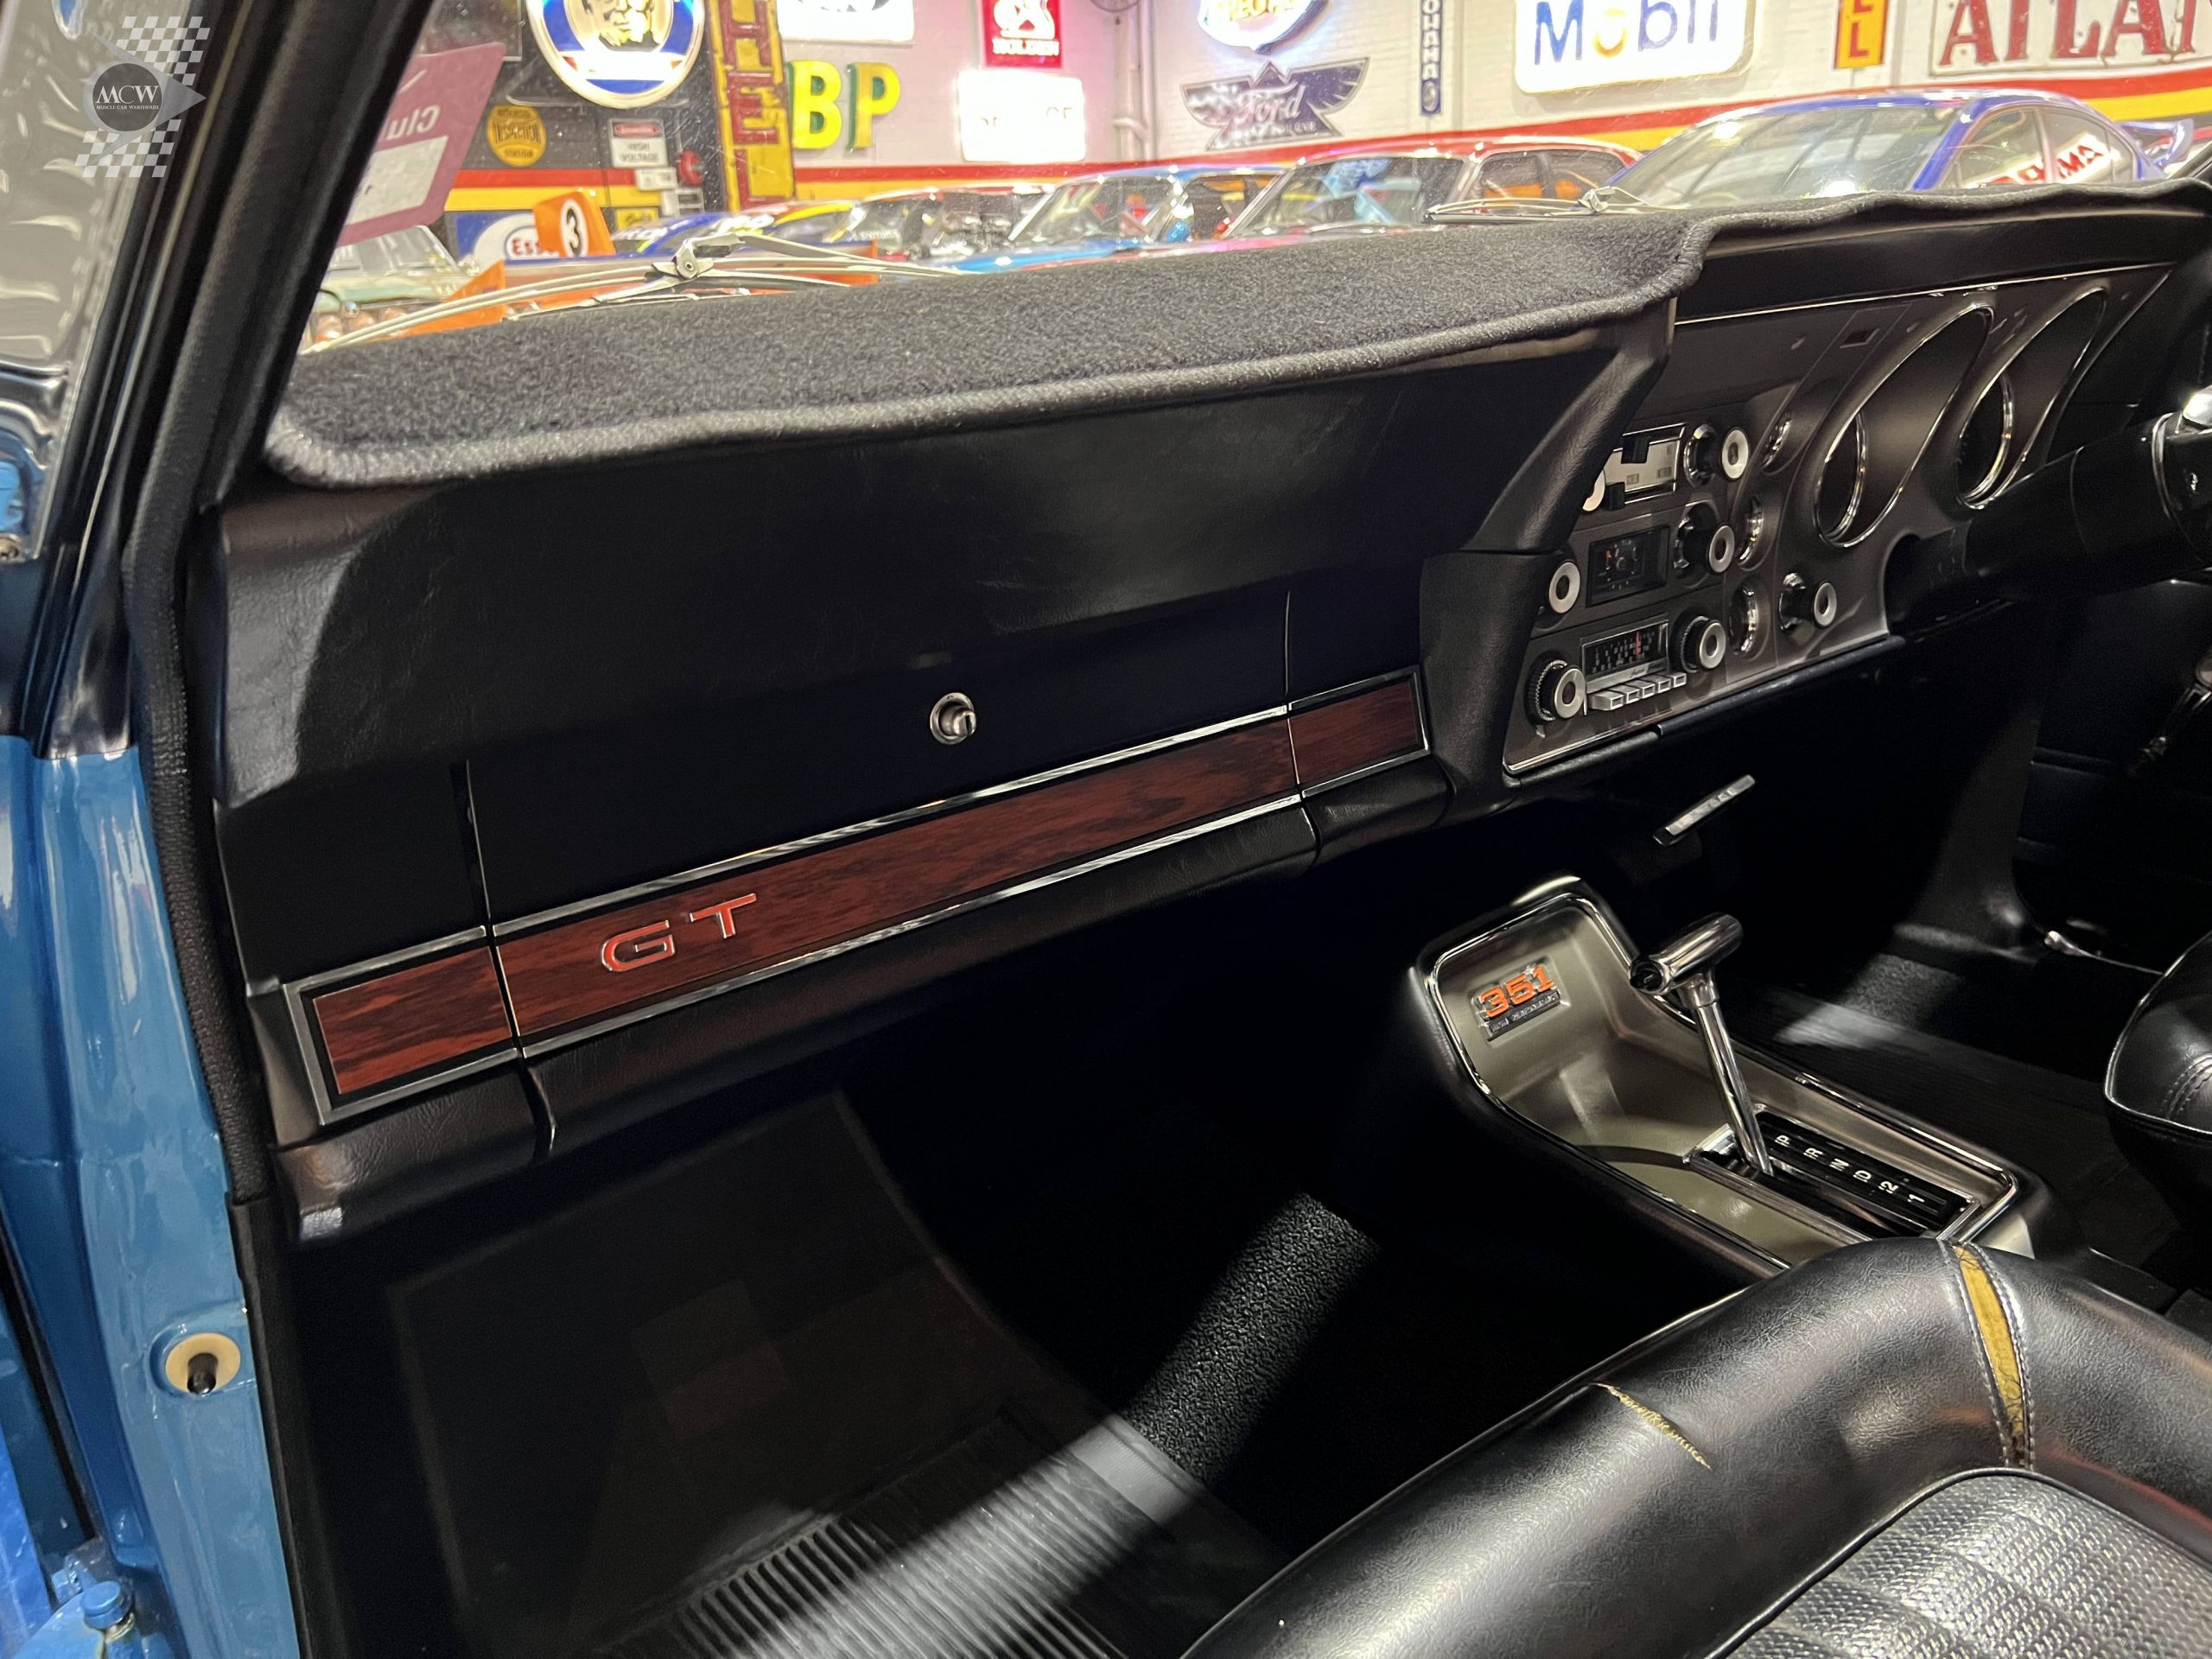 1970 Ford Falcon XW GT Interior - Muscle Car Warehouse